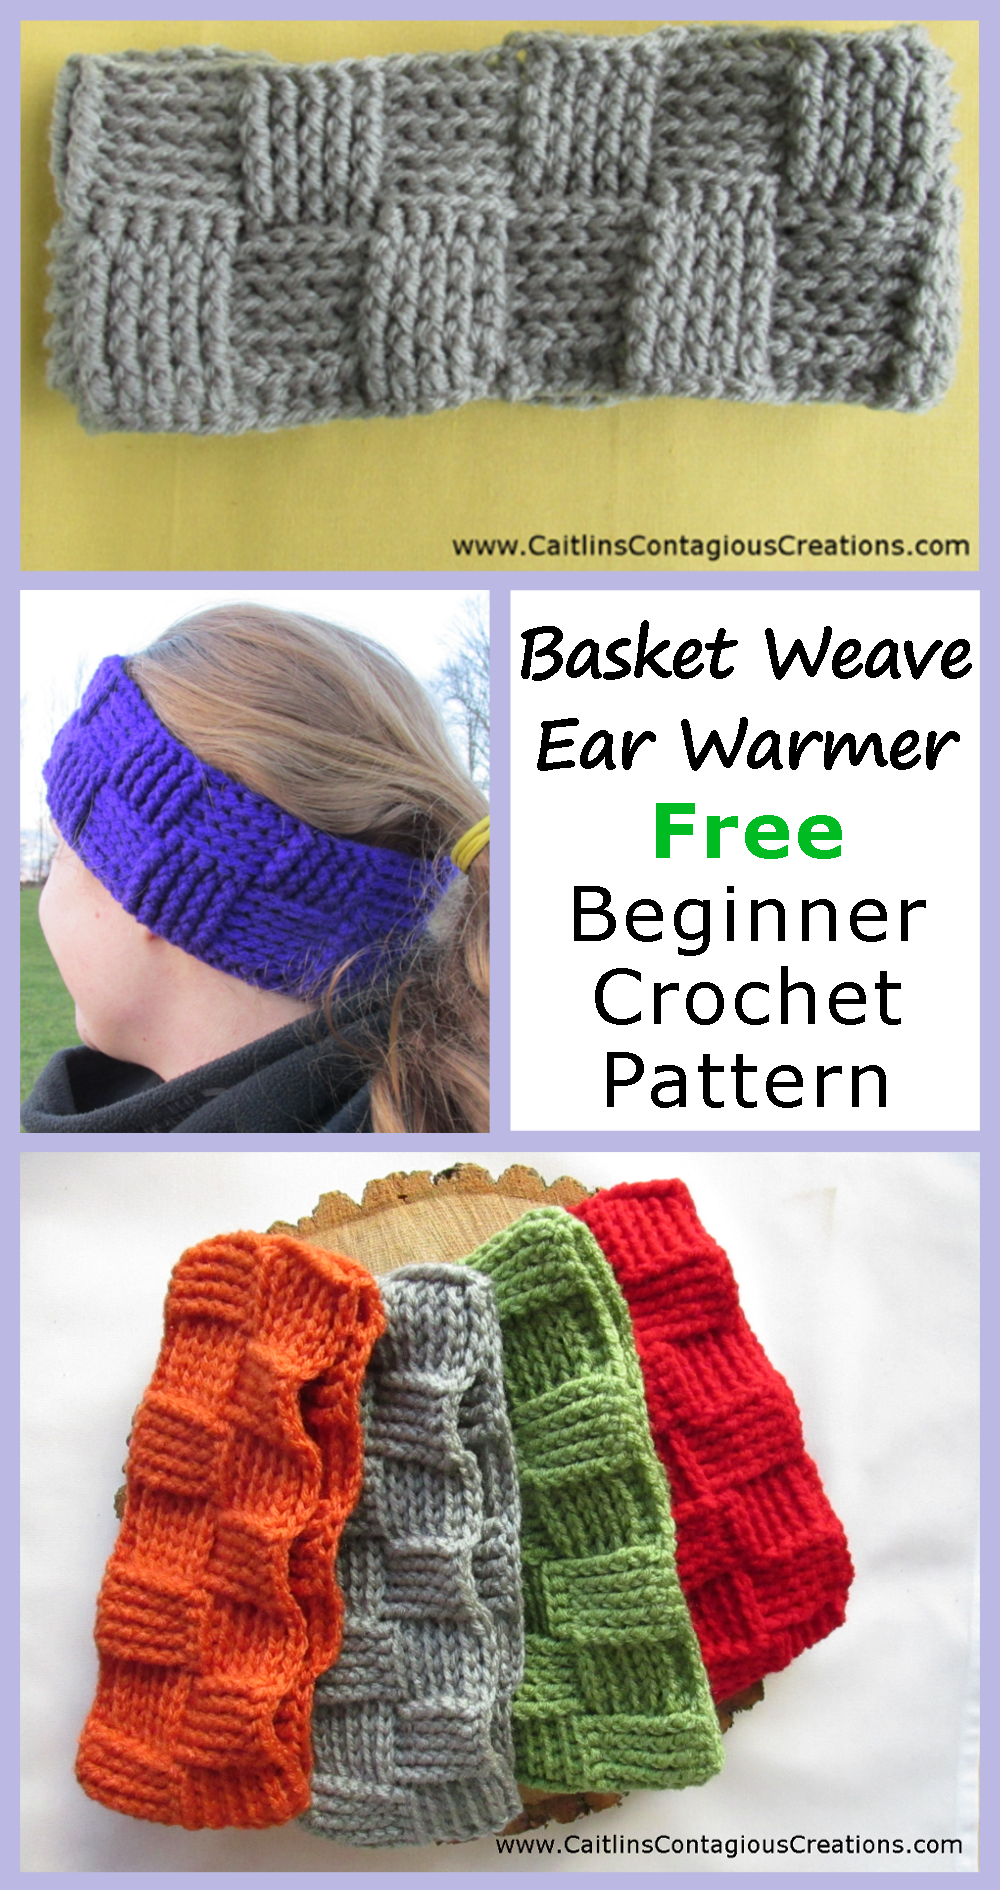 Basket Weave Ear Warmer Free Crochet Pattern. This fun and fast crochet design is perfect for beginners. This highly textured pattern is thick and warm. The written instructions also come with photo directions to help. Start yours today!